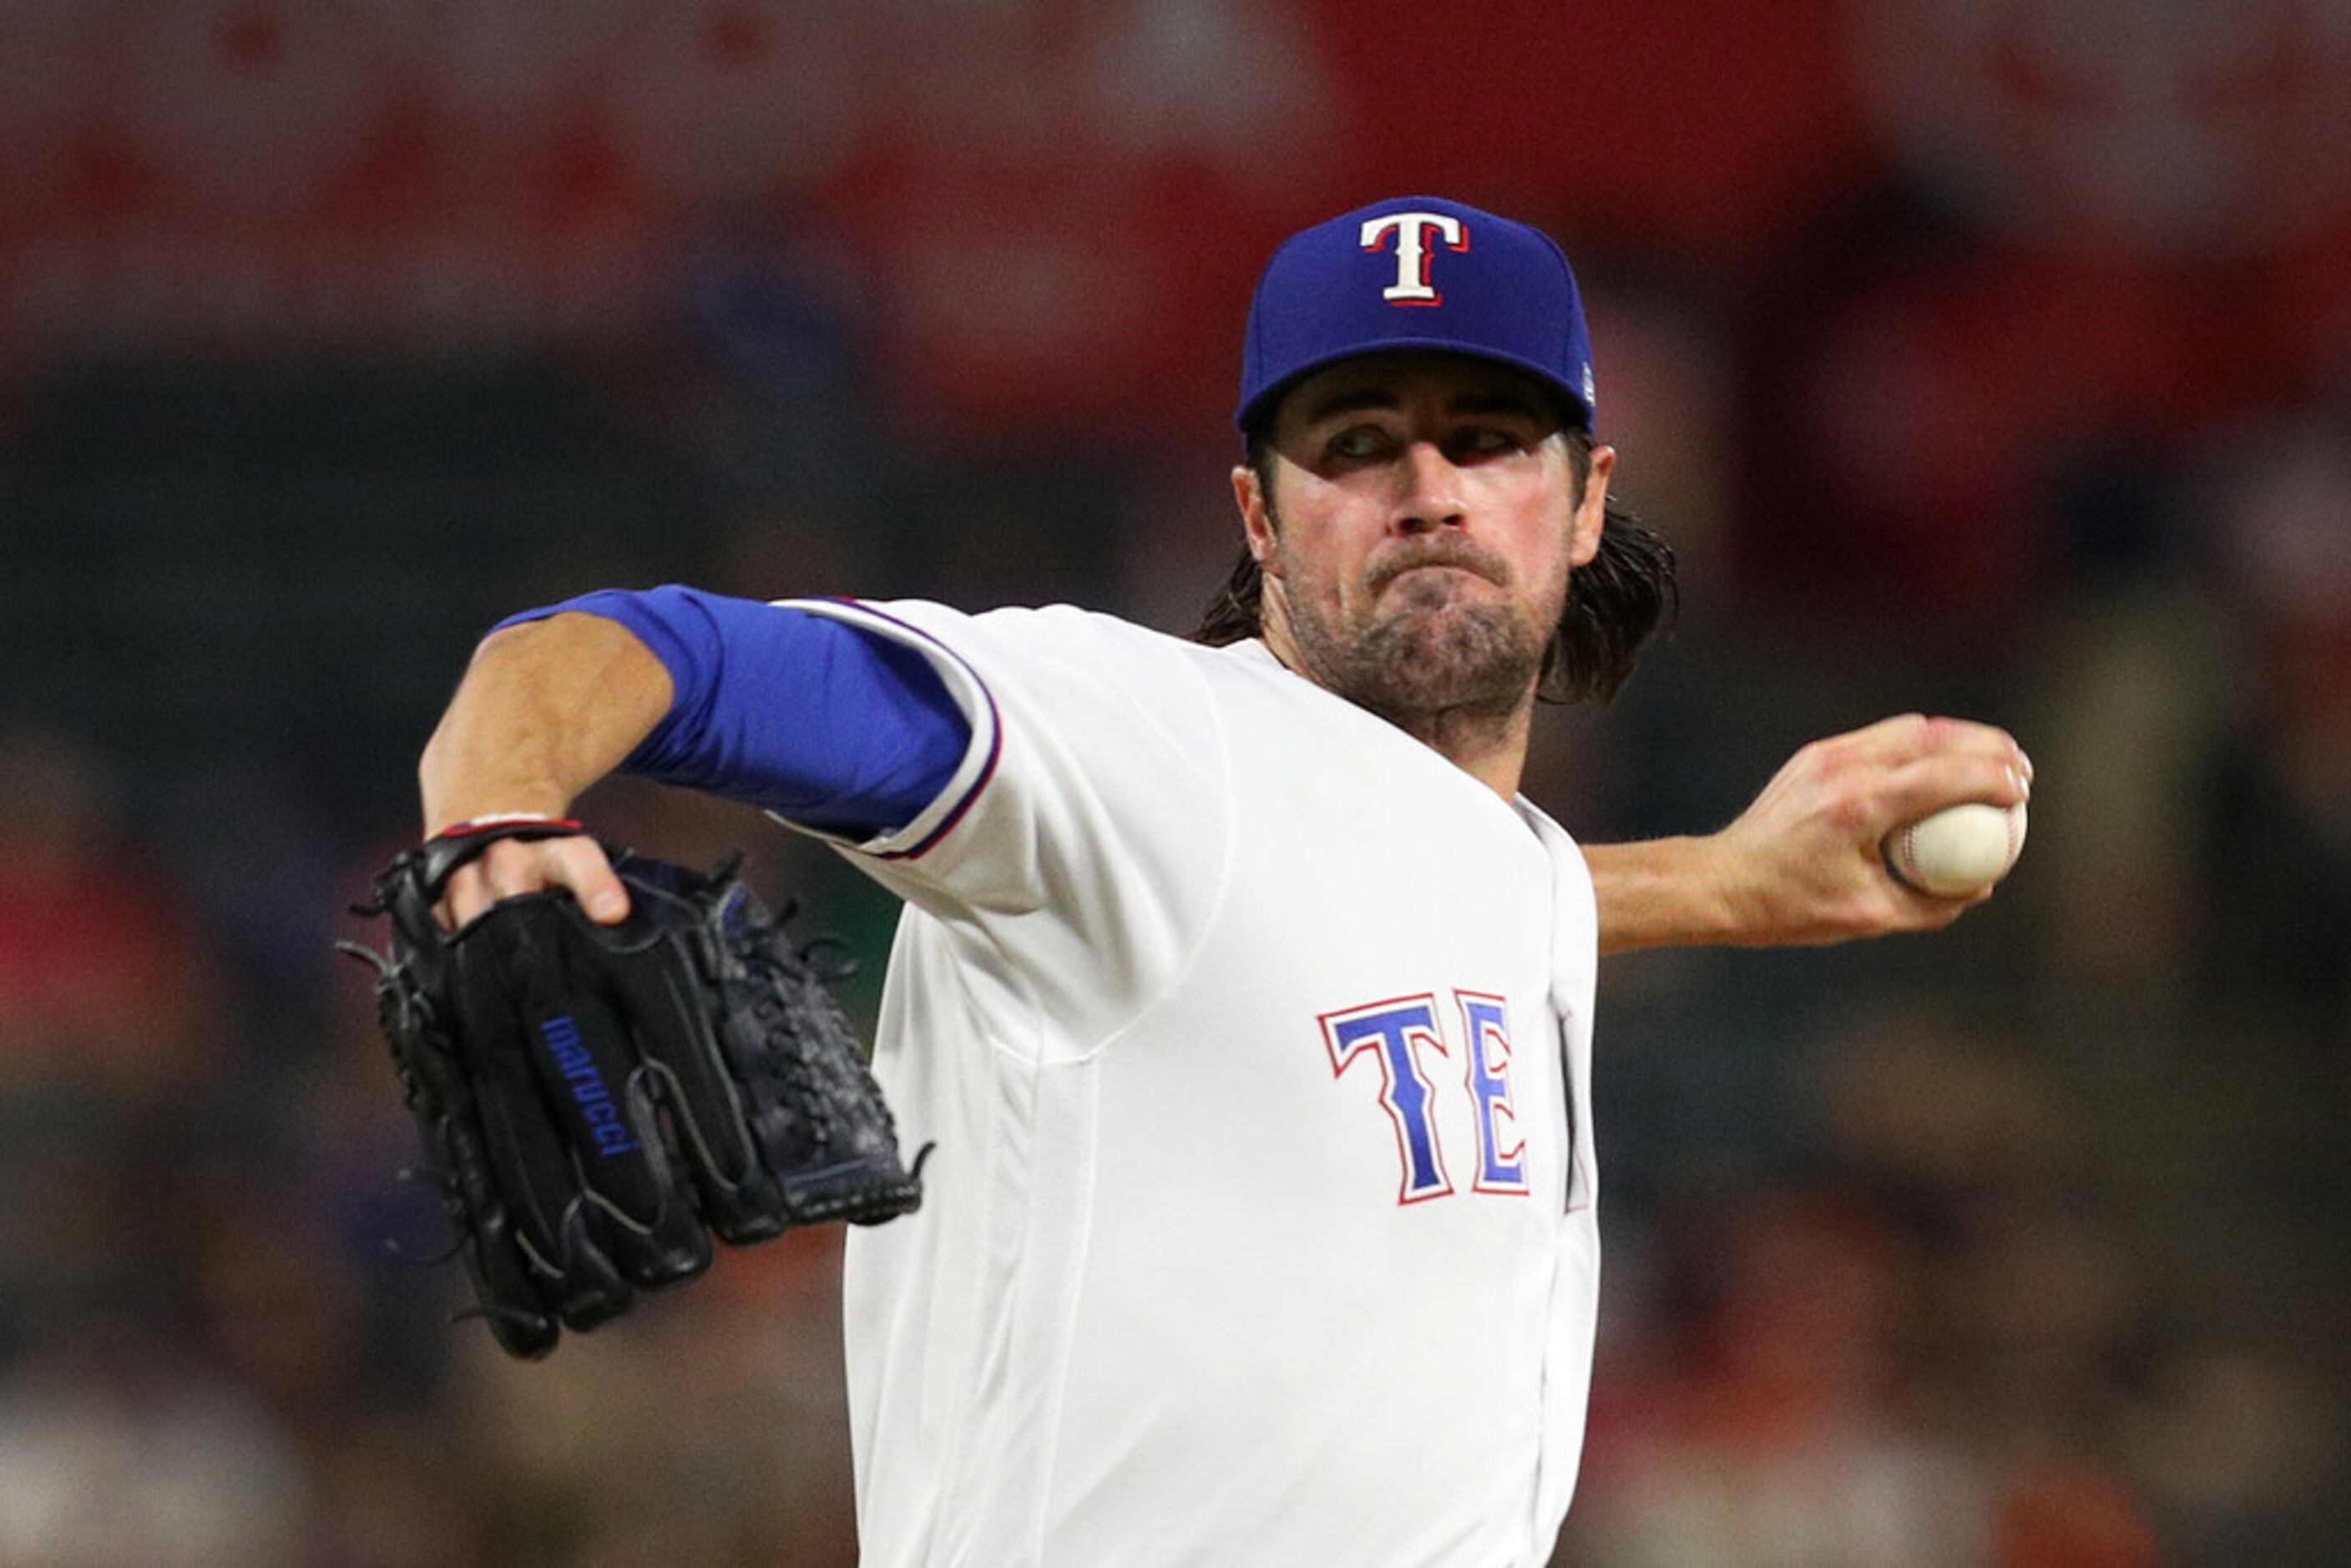 Cole Hamels won't be pitching for the Dodgers after all